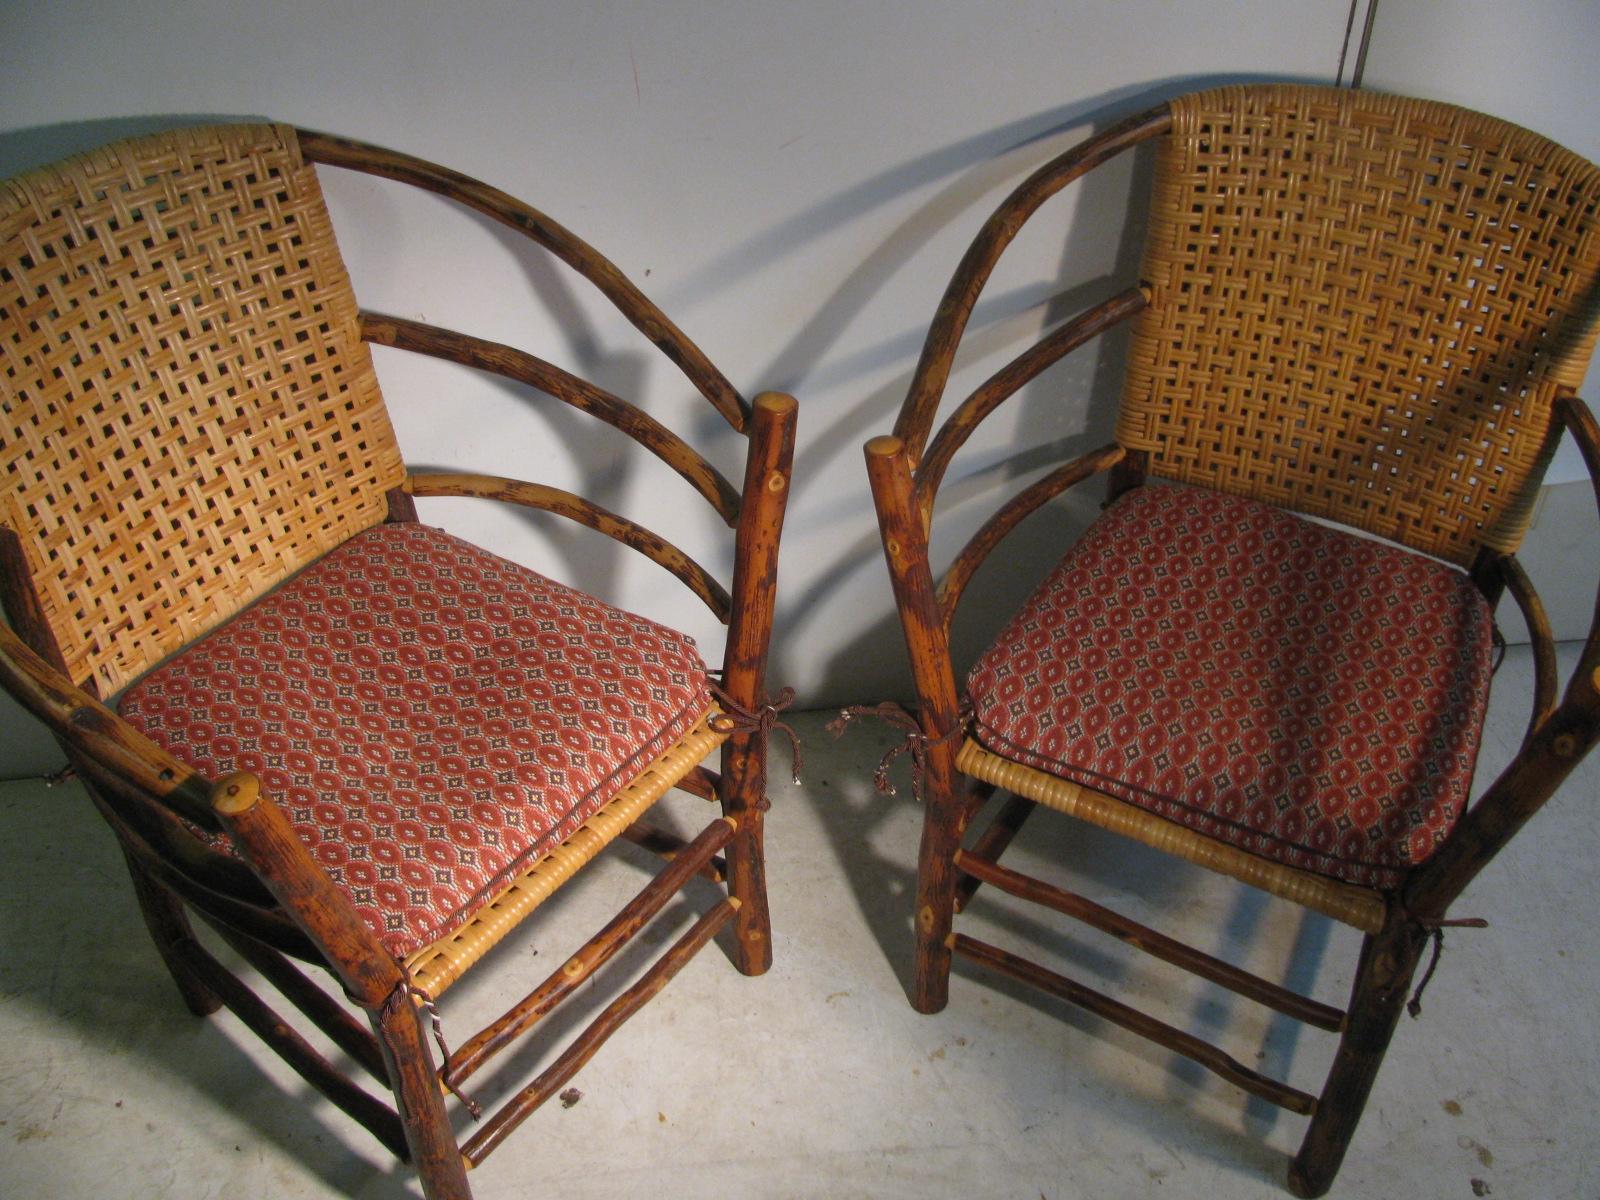 Fabulous pair of old hickory indoor outdoor lounge chairs with split reed backs and seats. Cushions for the chairs are supplied as pictured. Chairs are not old and have virtually no wear to speak of. Unsigned but do have brass metal tags with